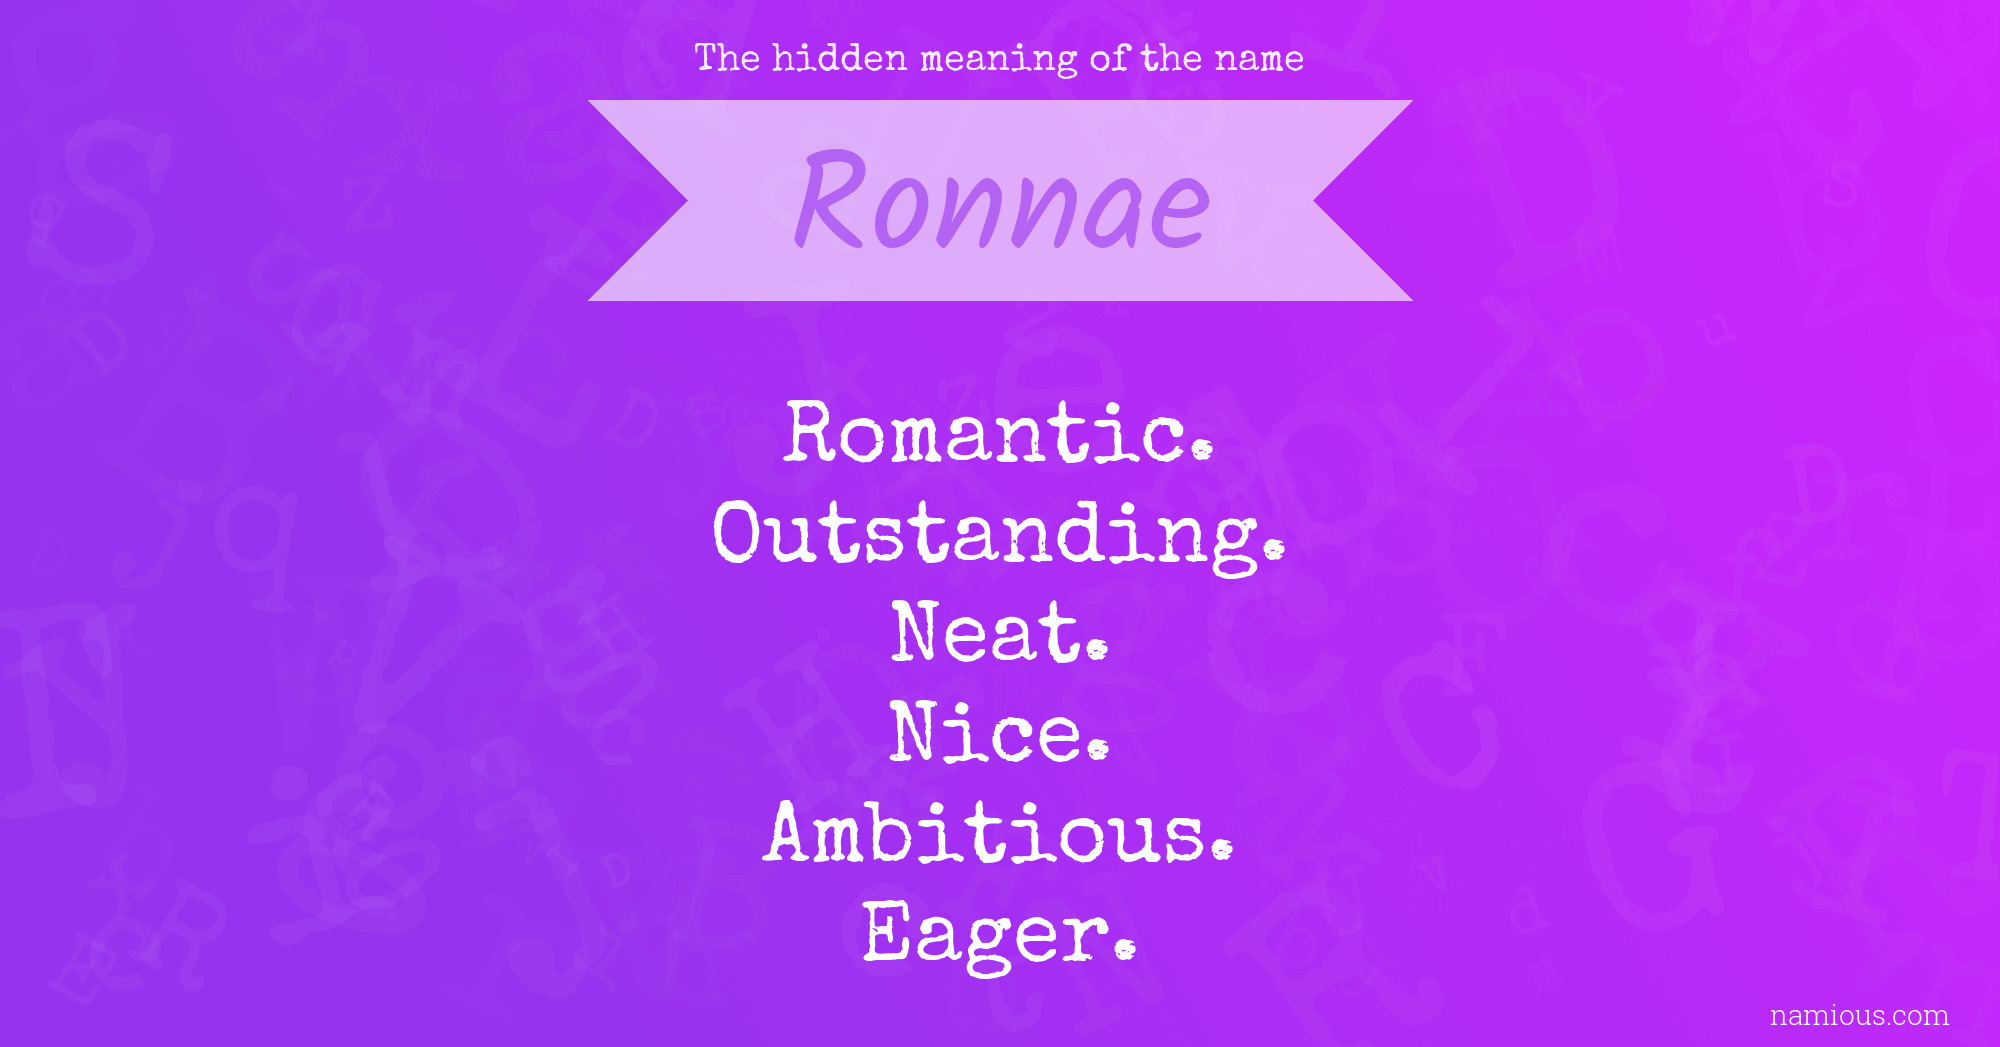 The hidden meaning of the name Ronnae